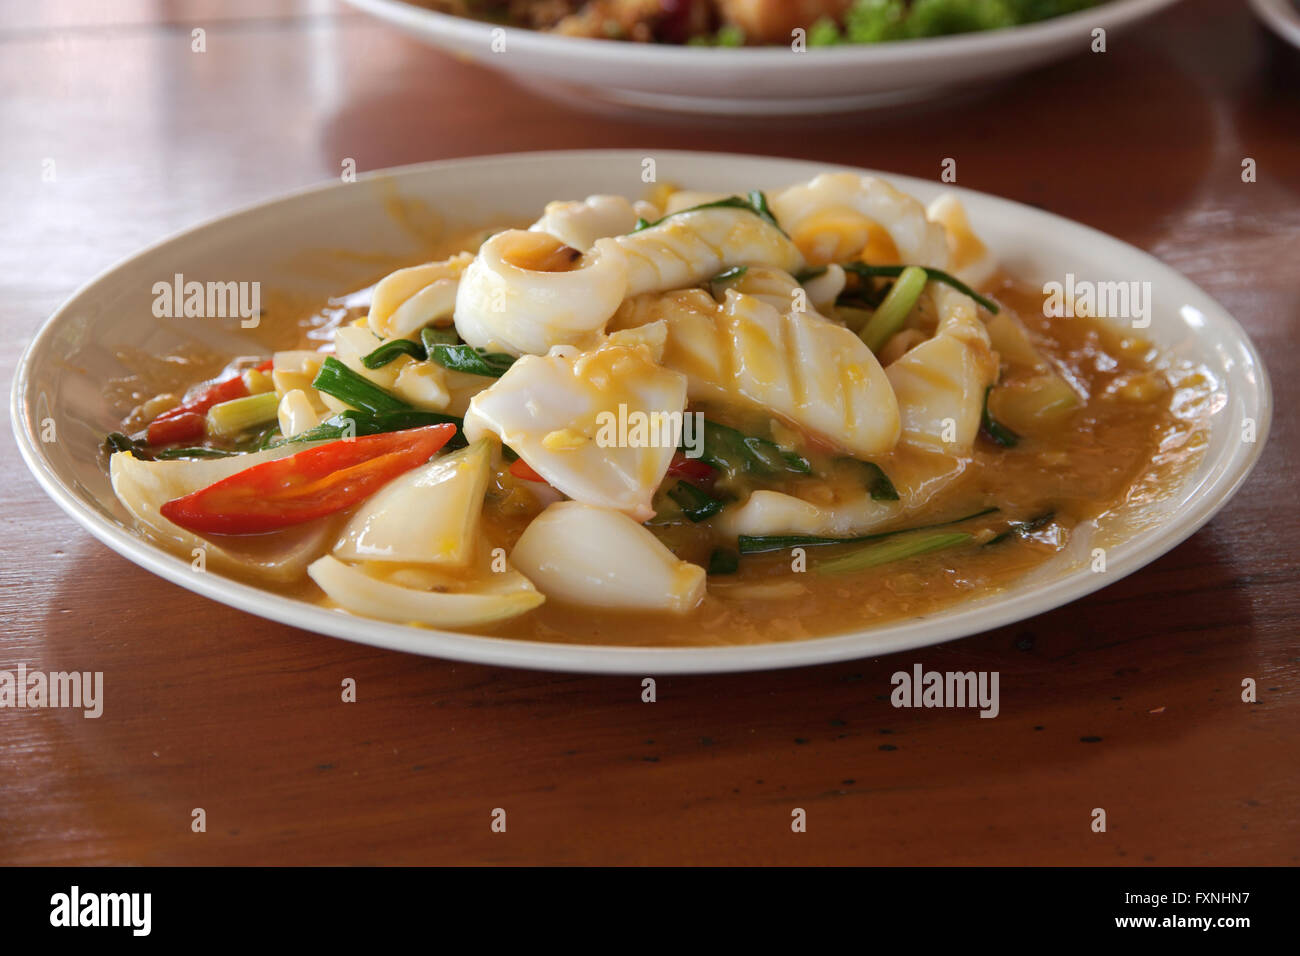 Stir fried squid with salted eggs on wood table Stock Photo